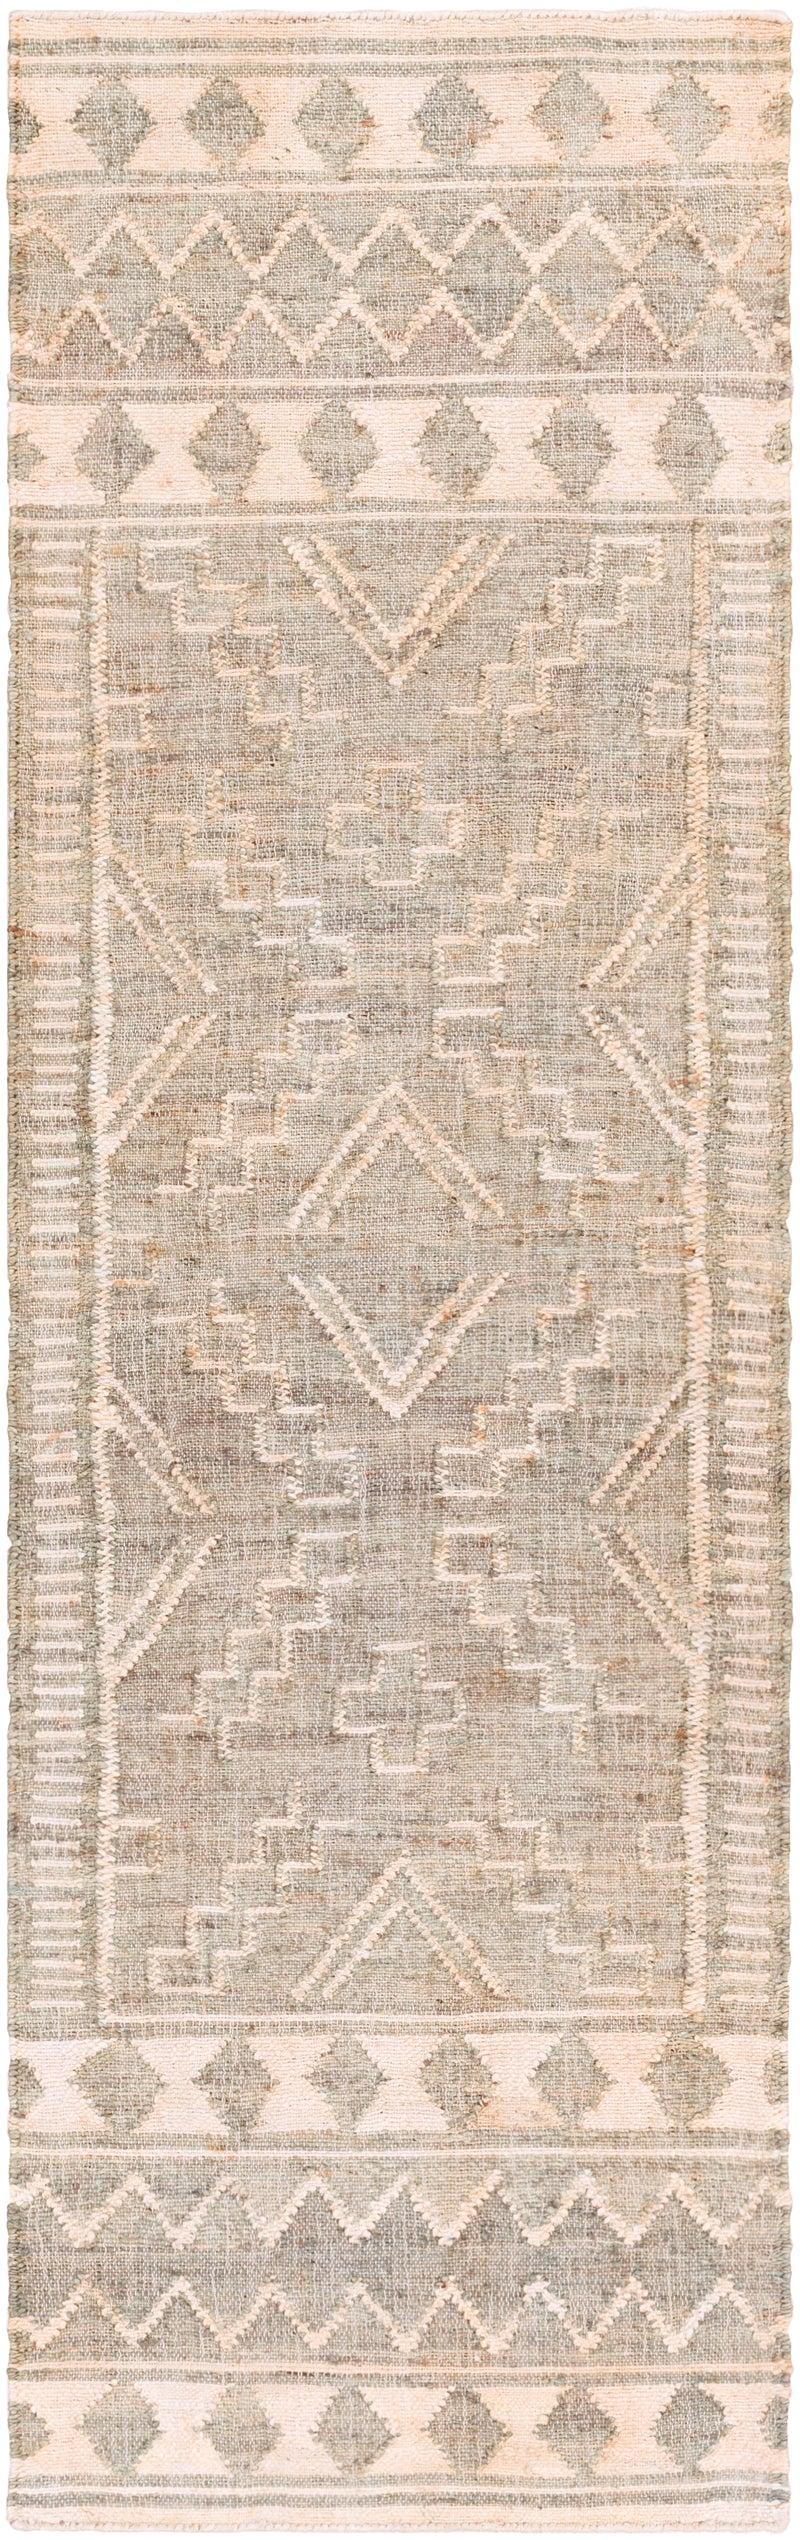 The Barbados Rug comes in both runner and area rug sizes. 